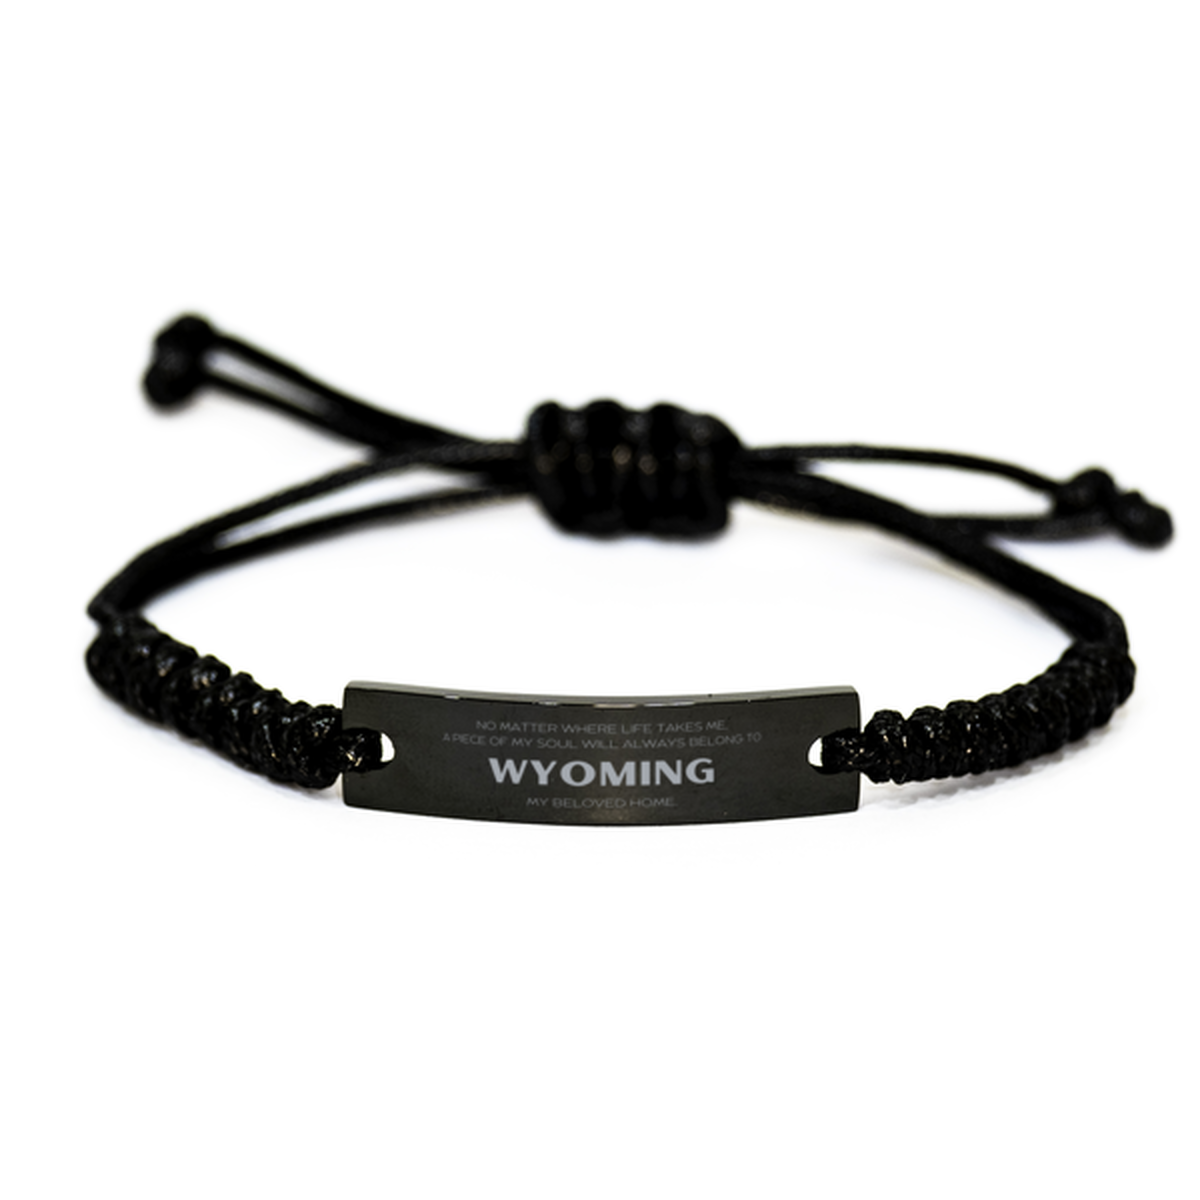 Love Wyoming State Gifts, My soul will always belong to Wyoming, Proud Black Rope Bracelet, Birthday Unique Gifts For Wyoming Men, Women, Friends